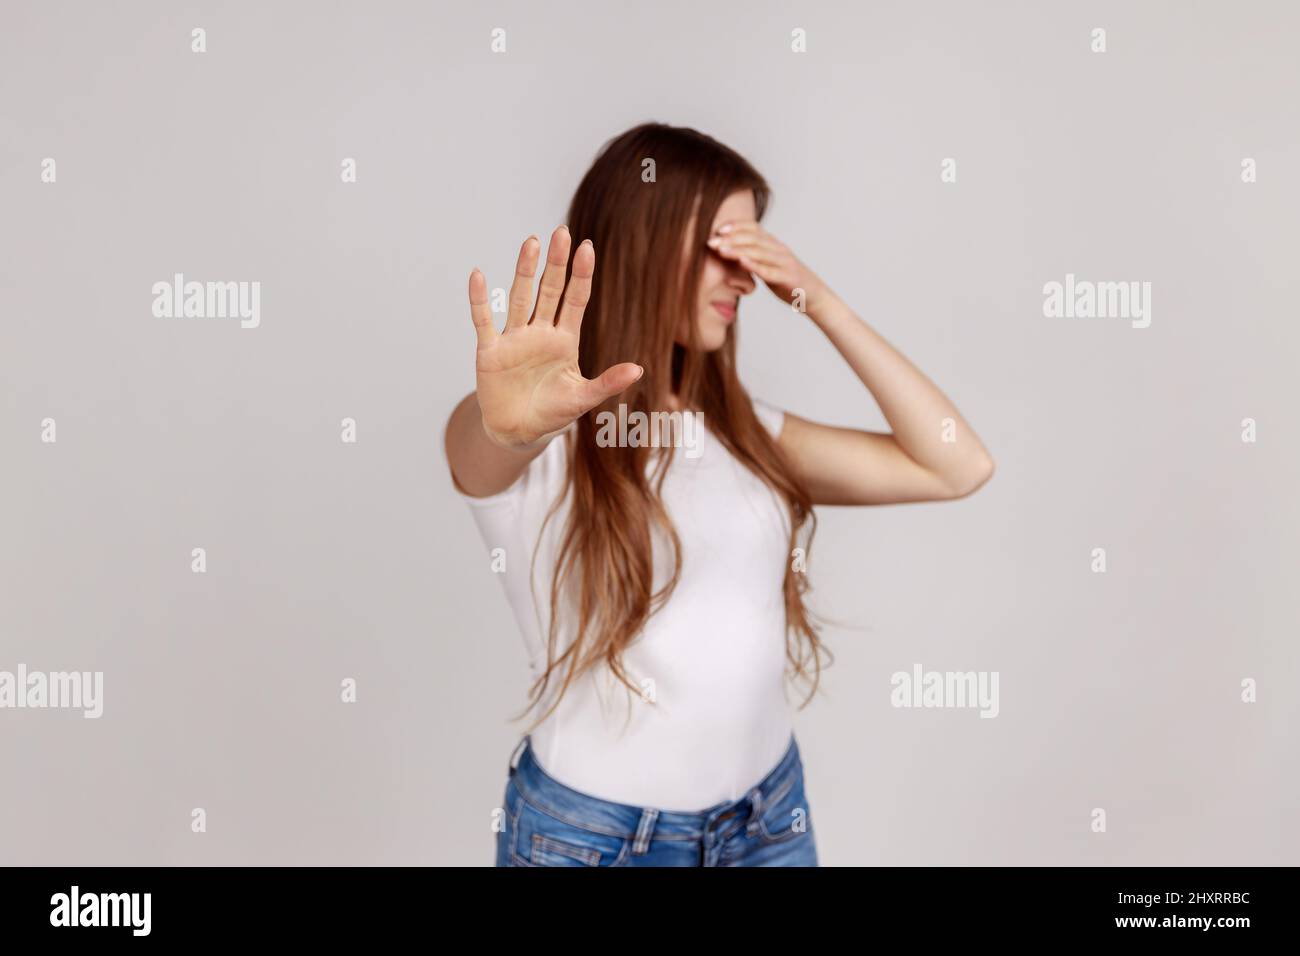 Portrait of afraid beautiful woman closing eyes with palm and showing stop hand gesture, turning face, does not want to see, wearing white T-shirt. Indoor studio shot isolated on gray background. Stock Photo